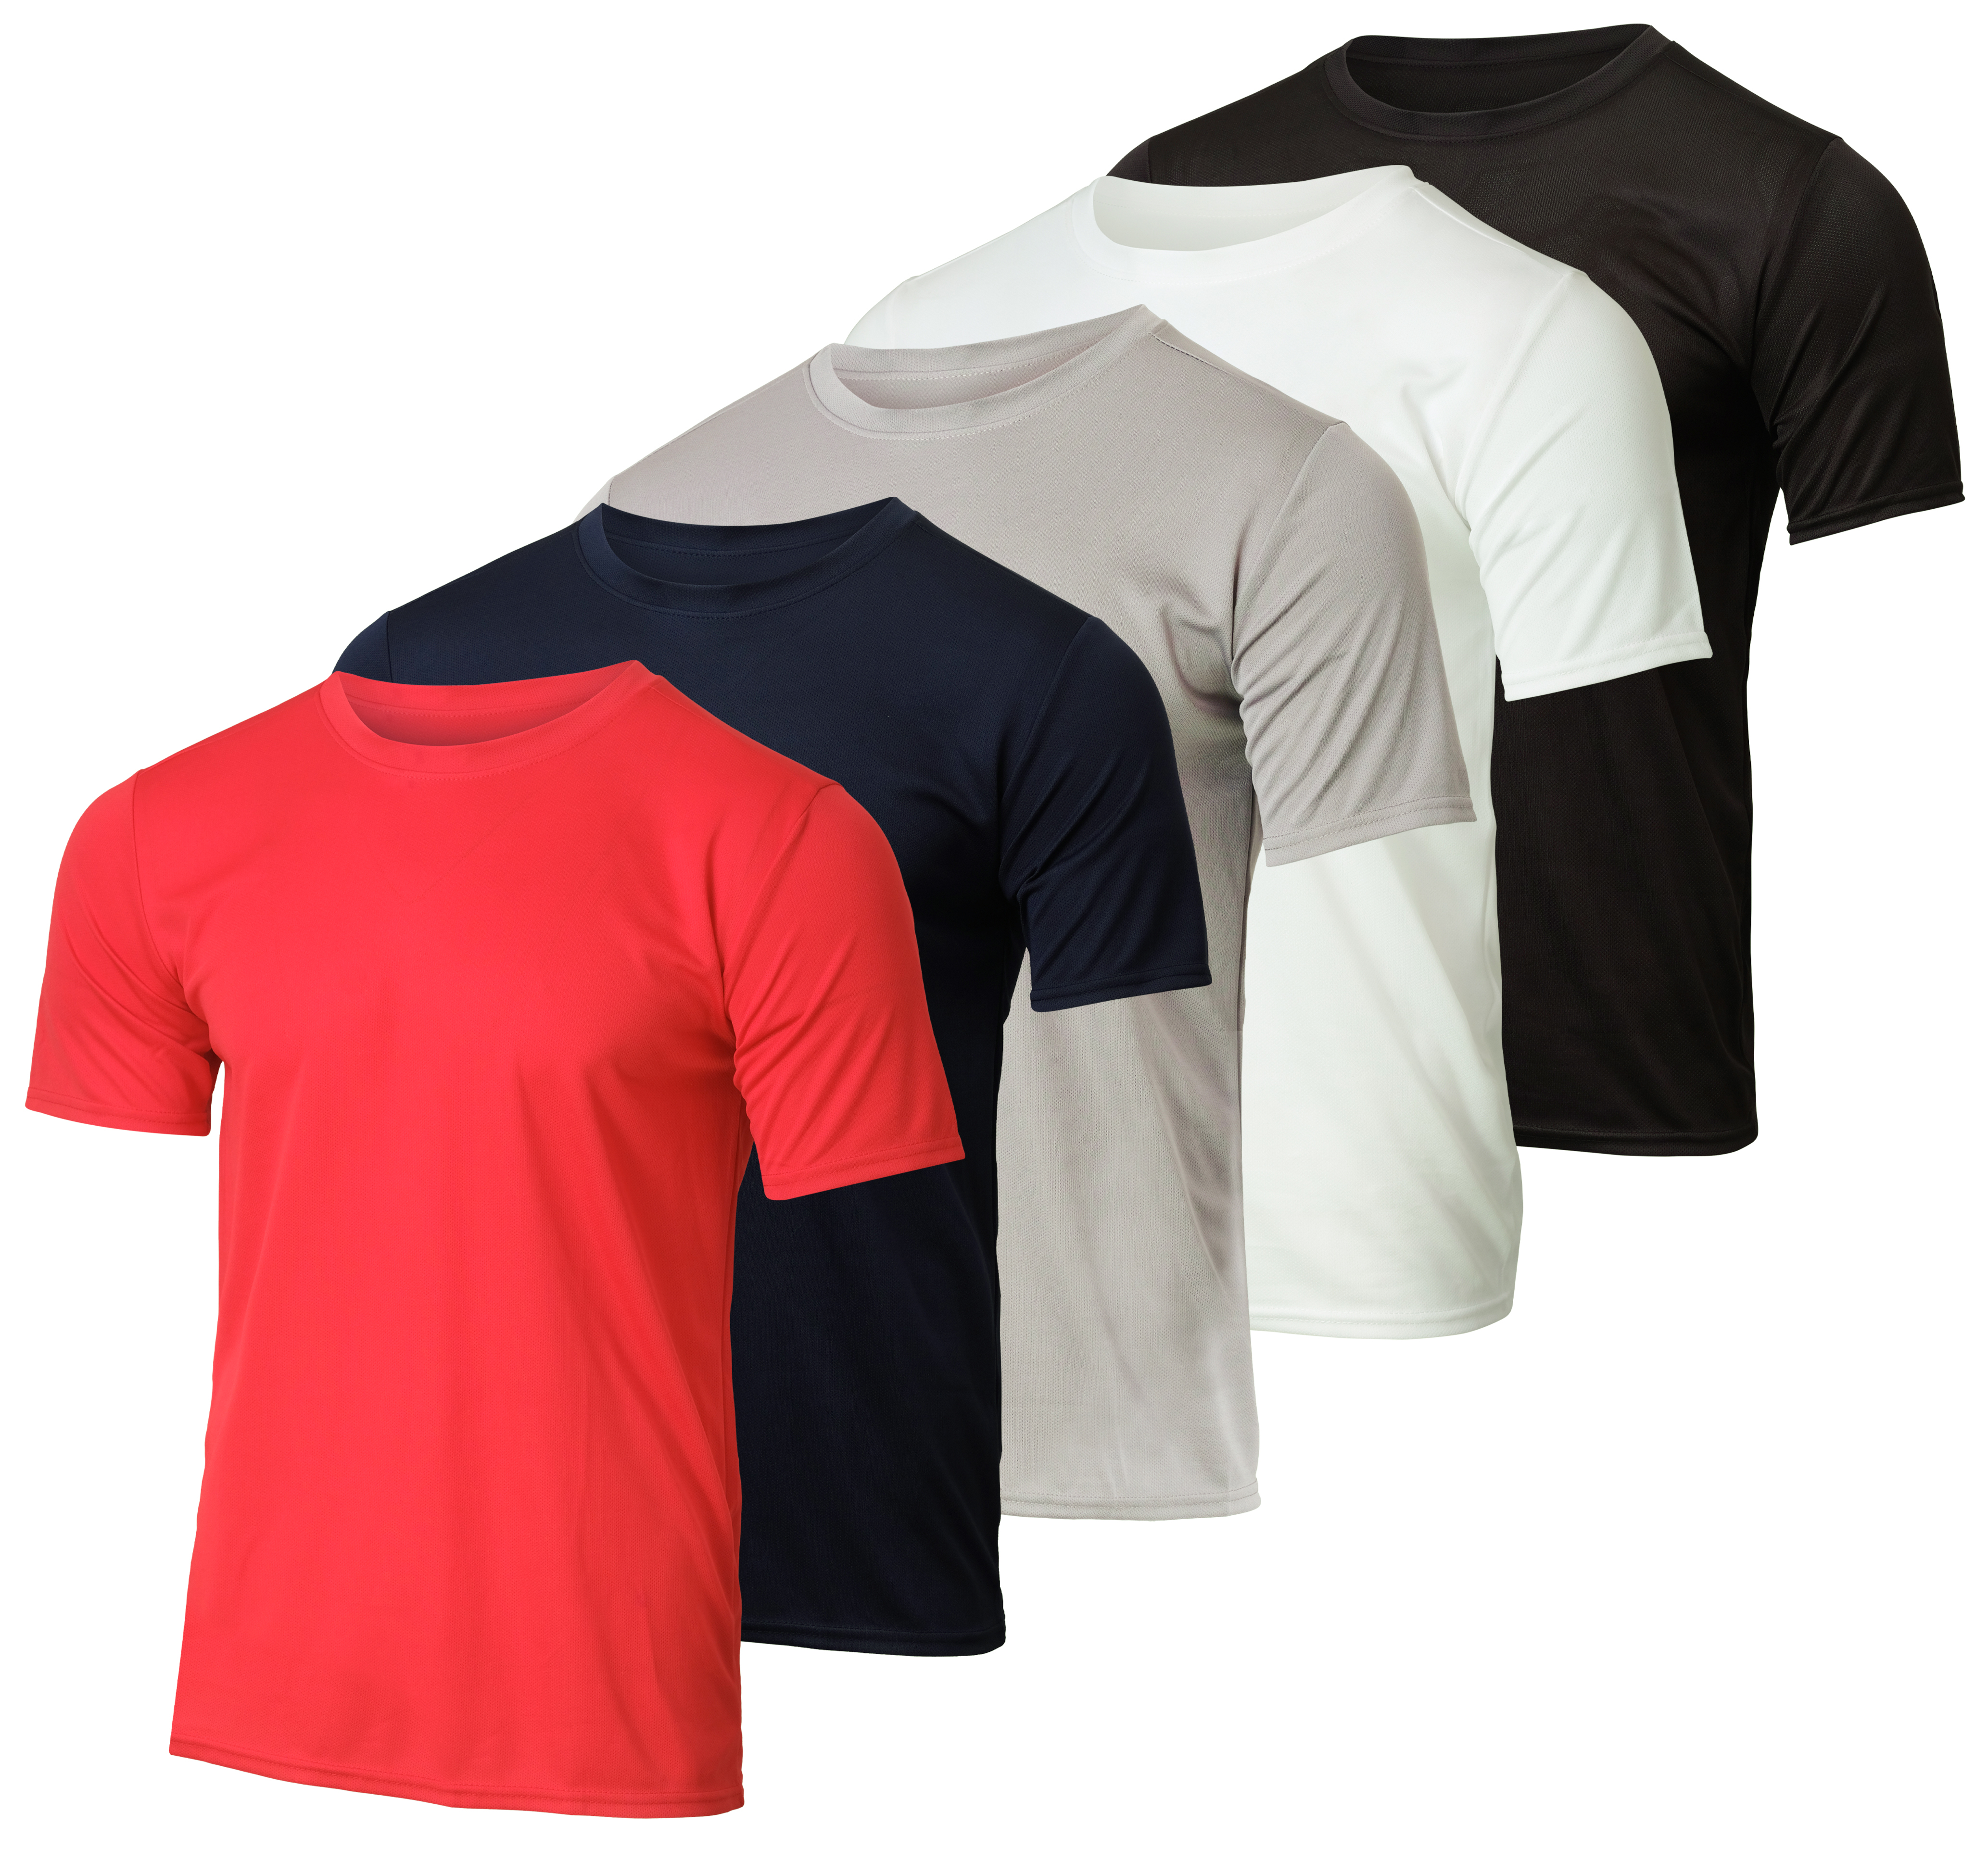 Real Essentials 5 Pack Men’s Active Quick Dry Mesh Crew Neck T Shirts | Athletic Short Sleeve Tee (Available in Big & Tall) - image 1 of 6